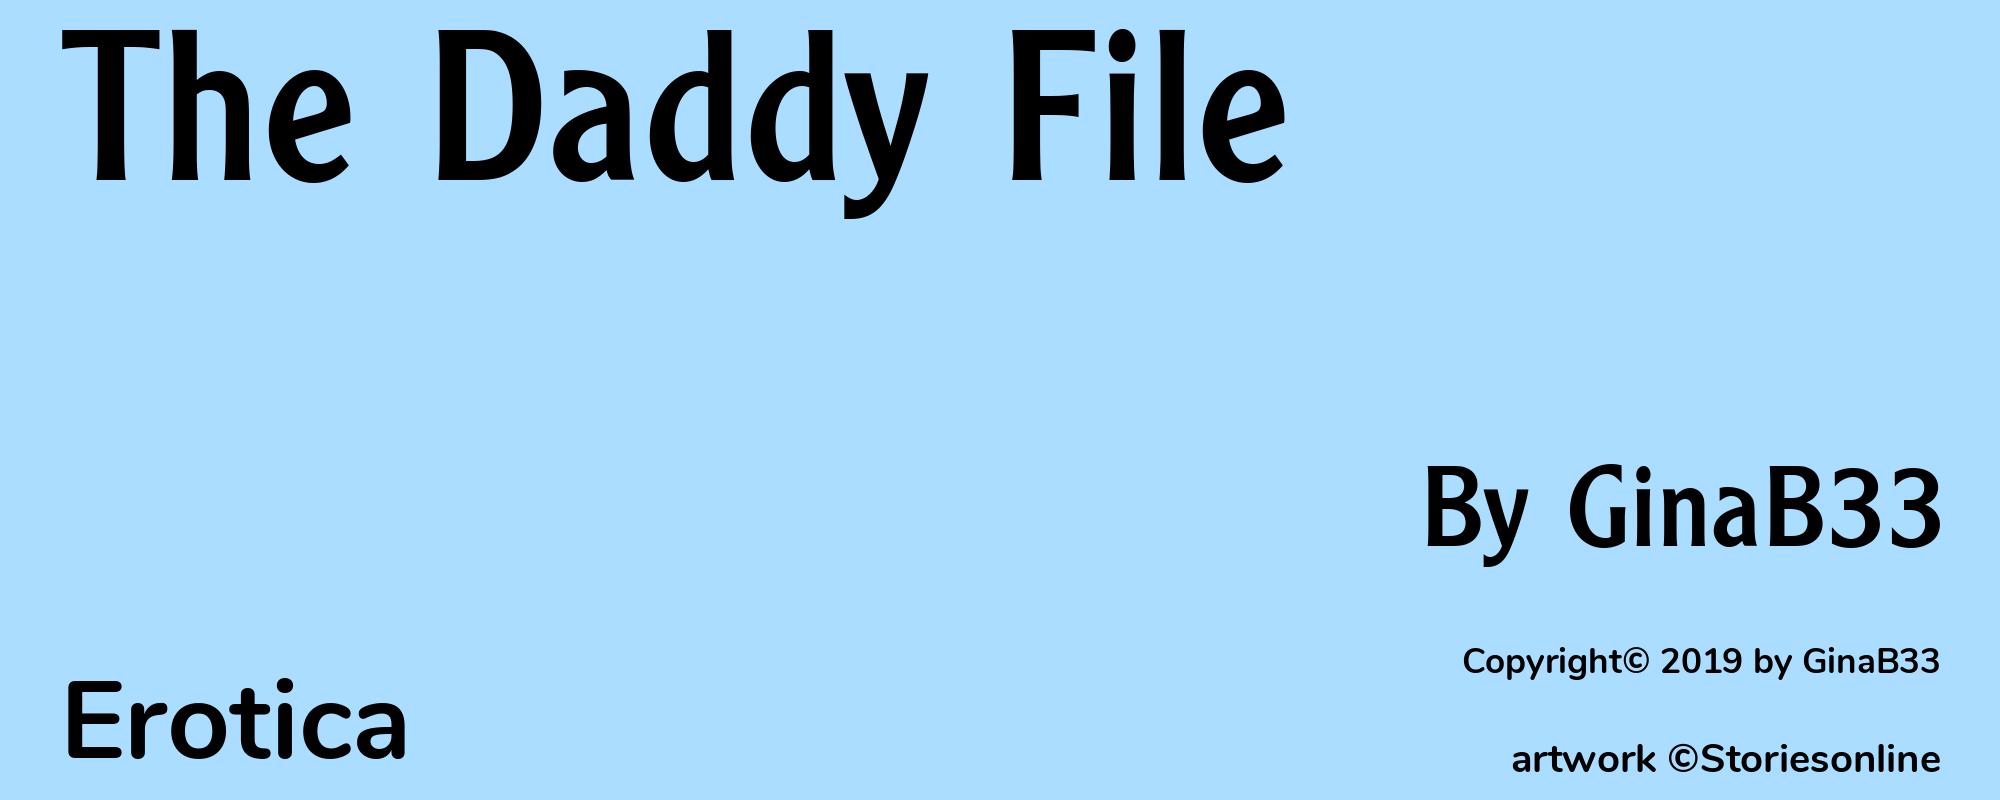 The Daddy File - Cover